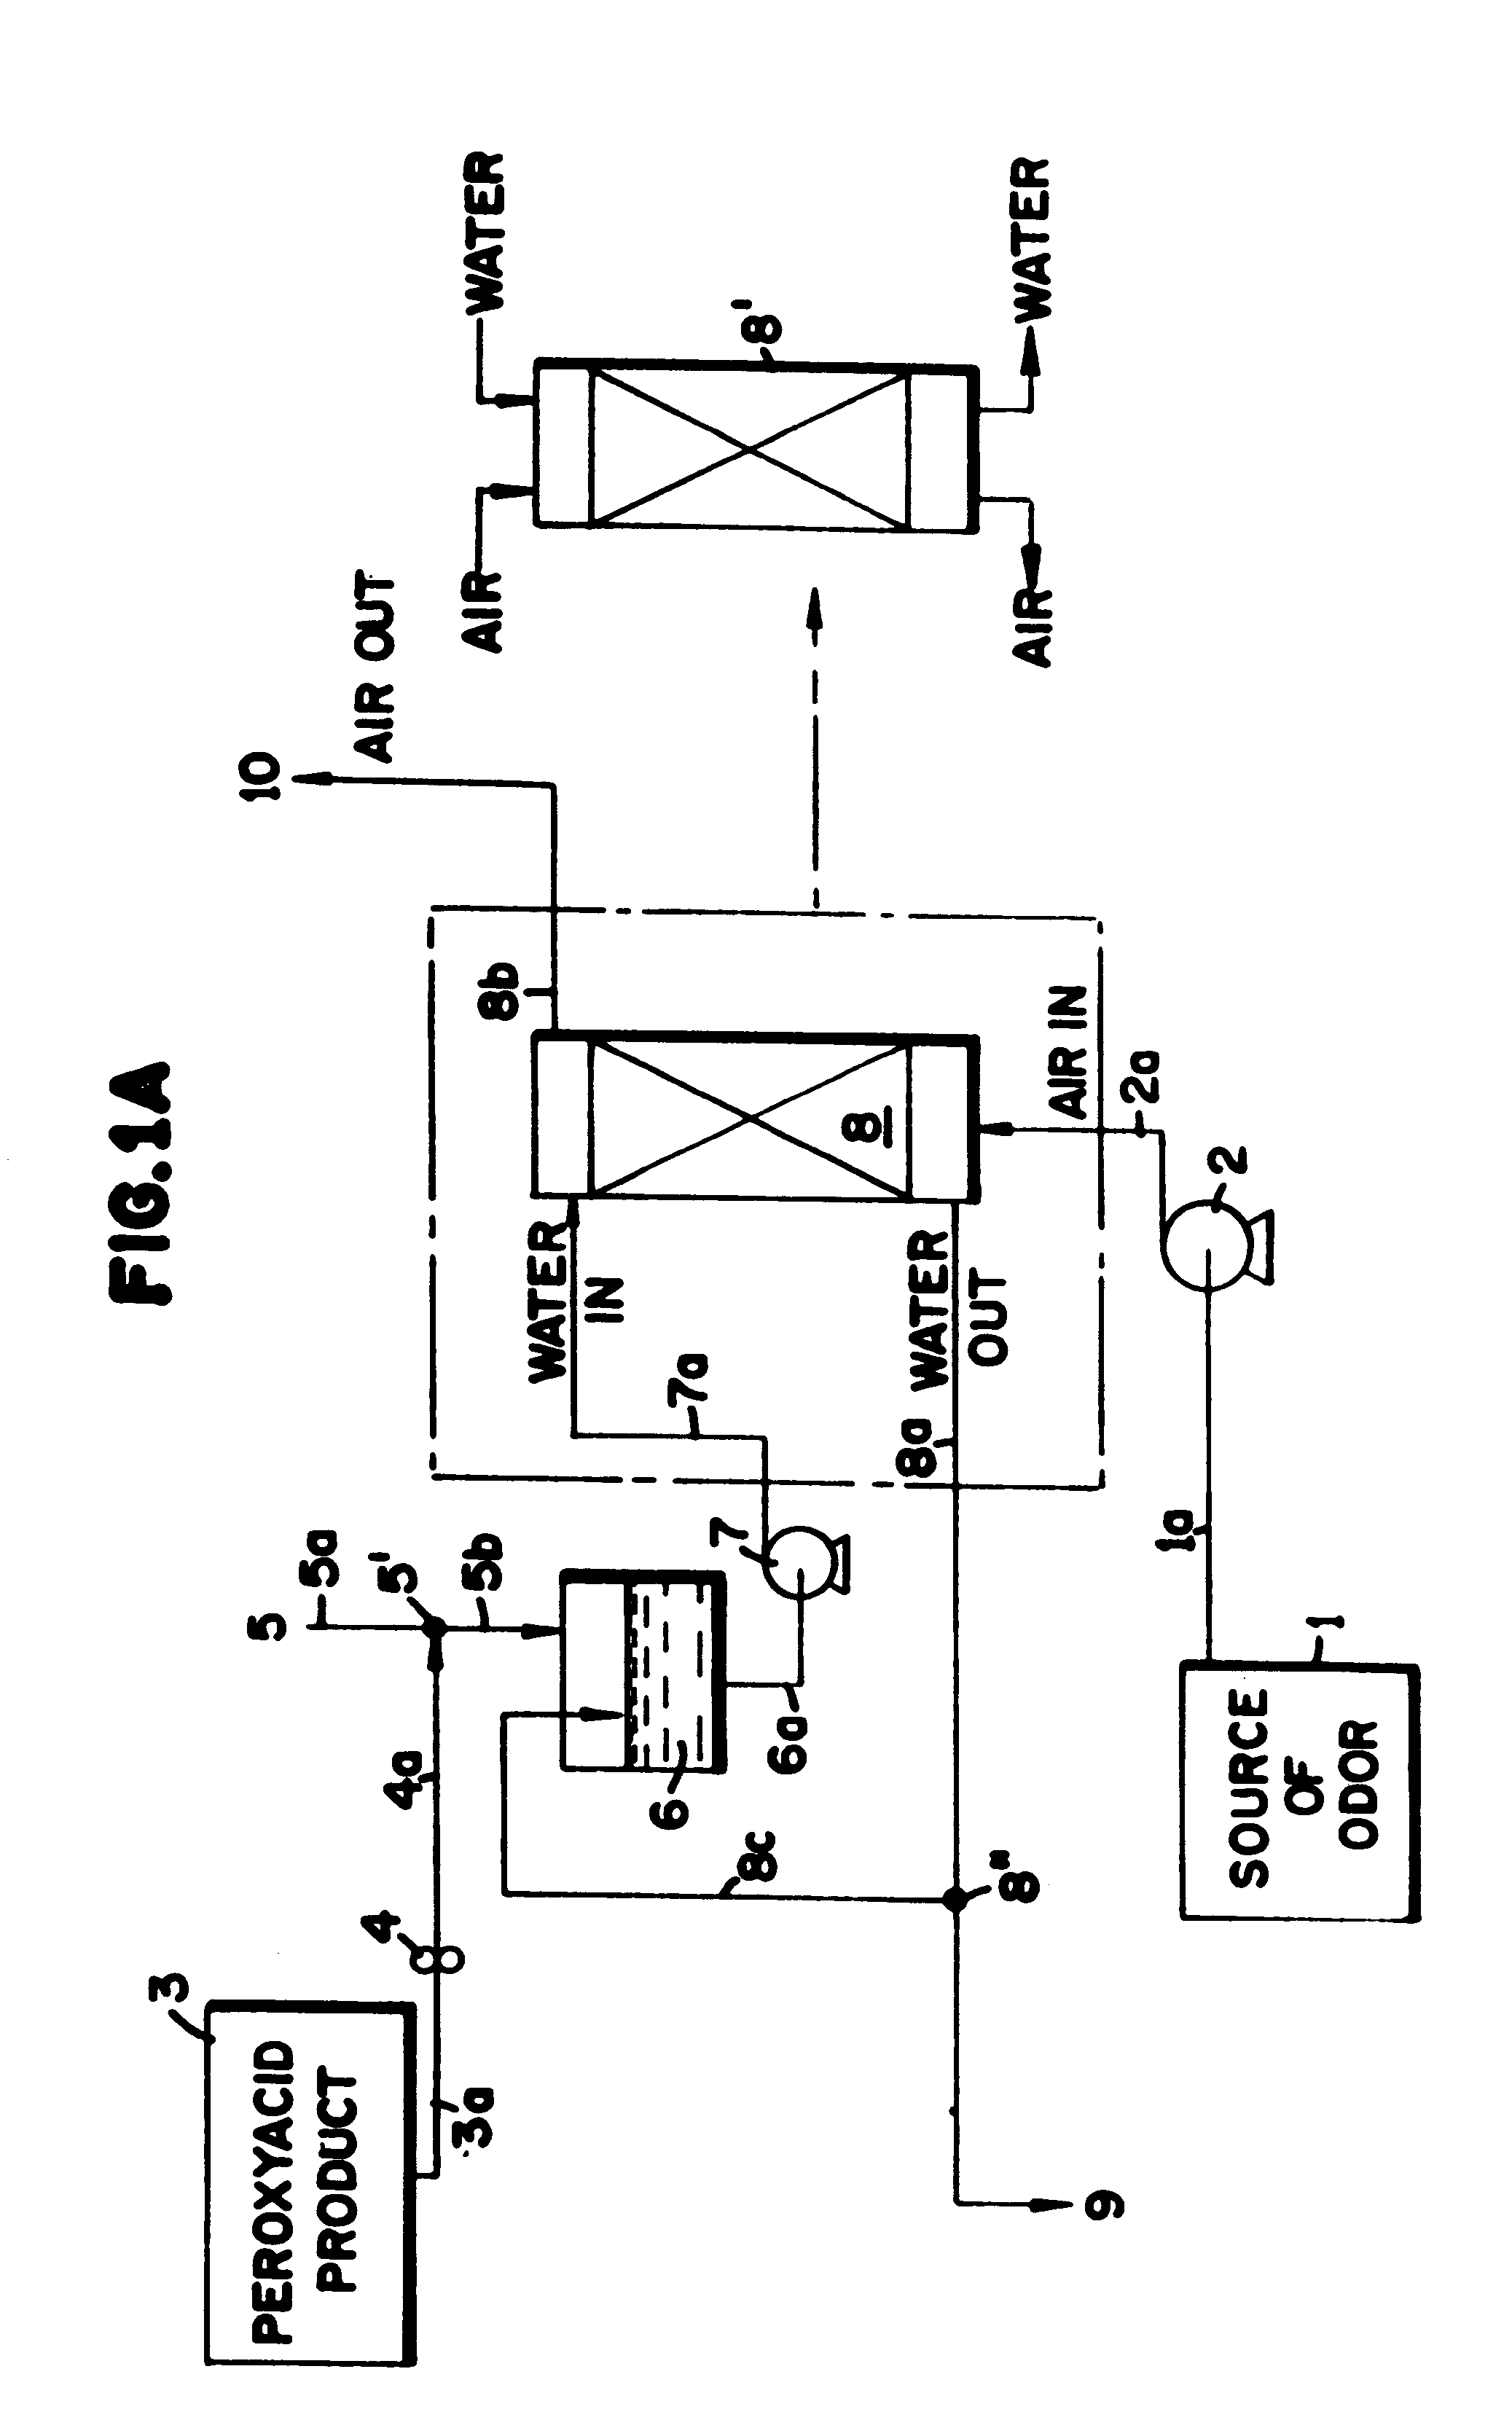 Enhanced method of using peroxyacid compounds in odor reduction